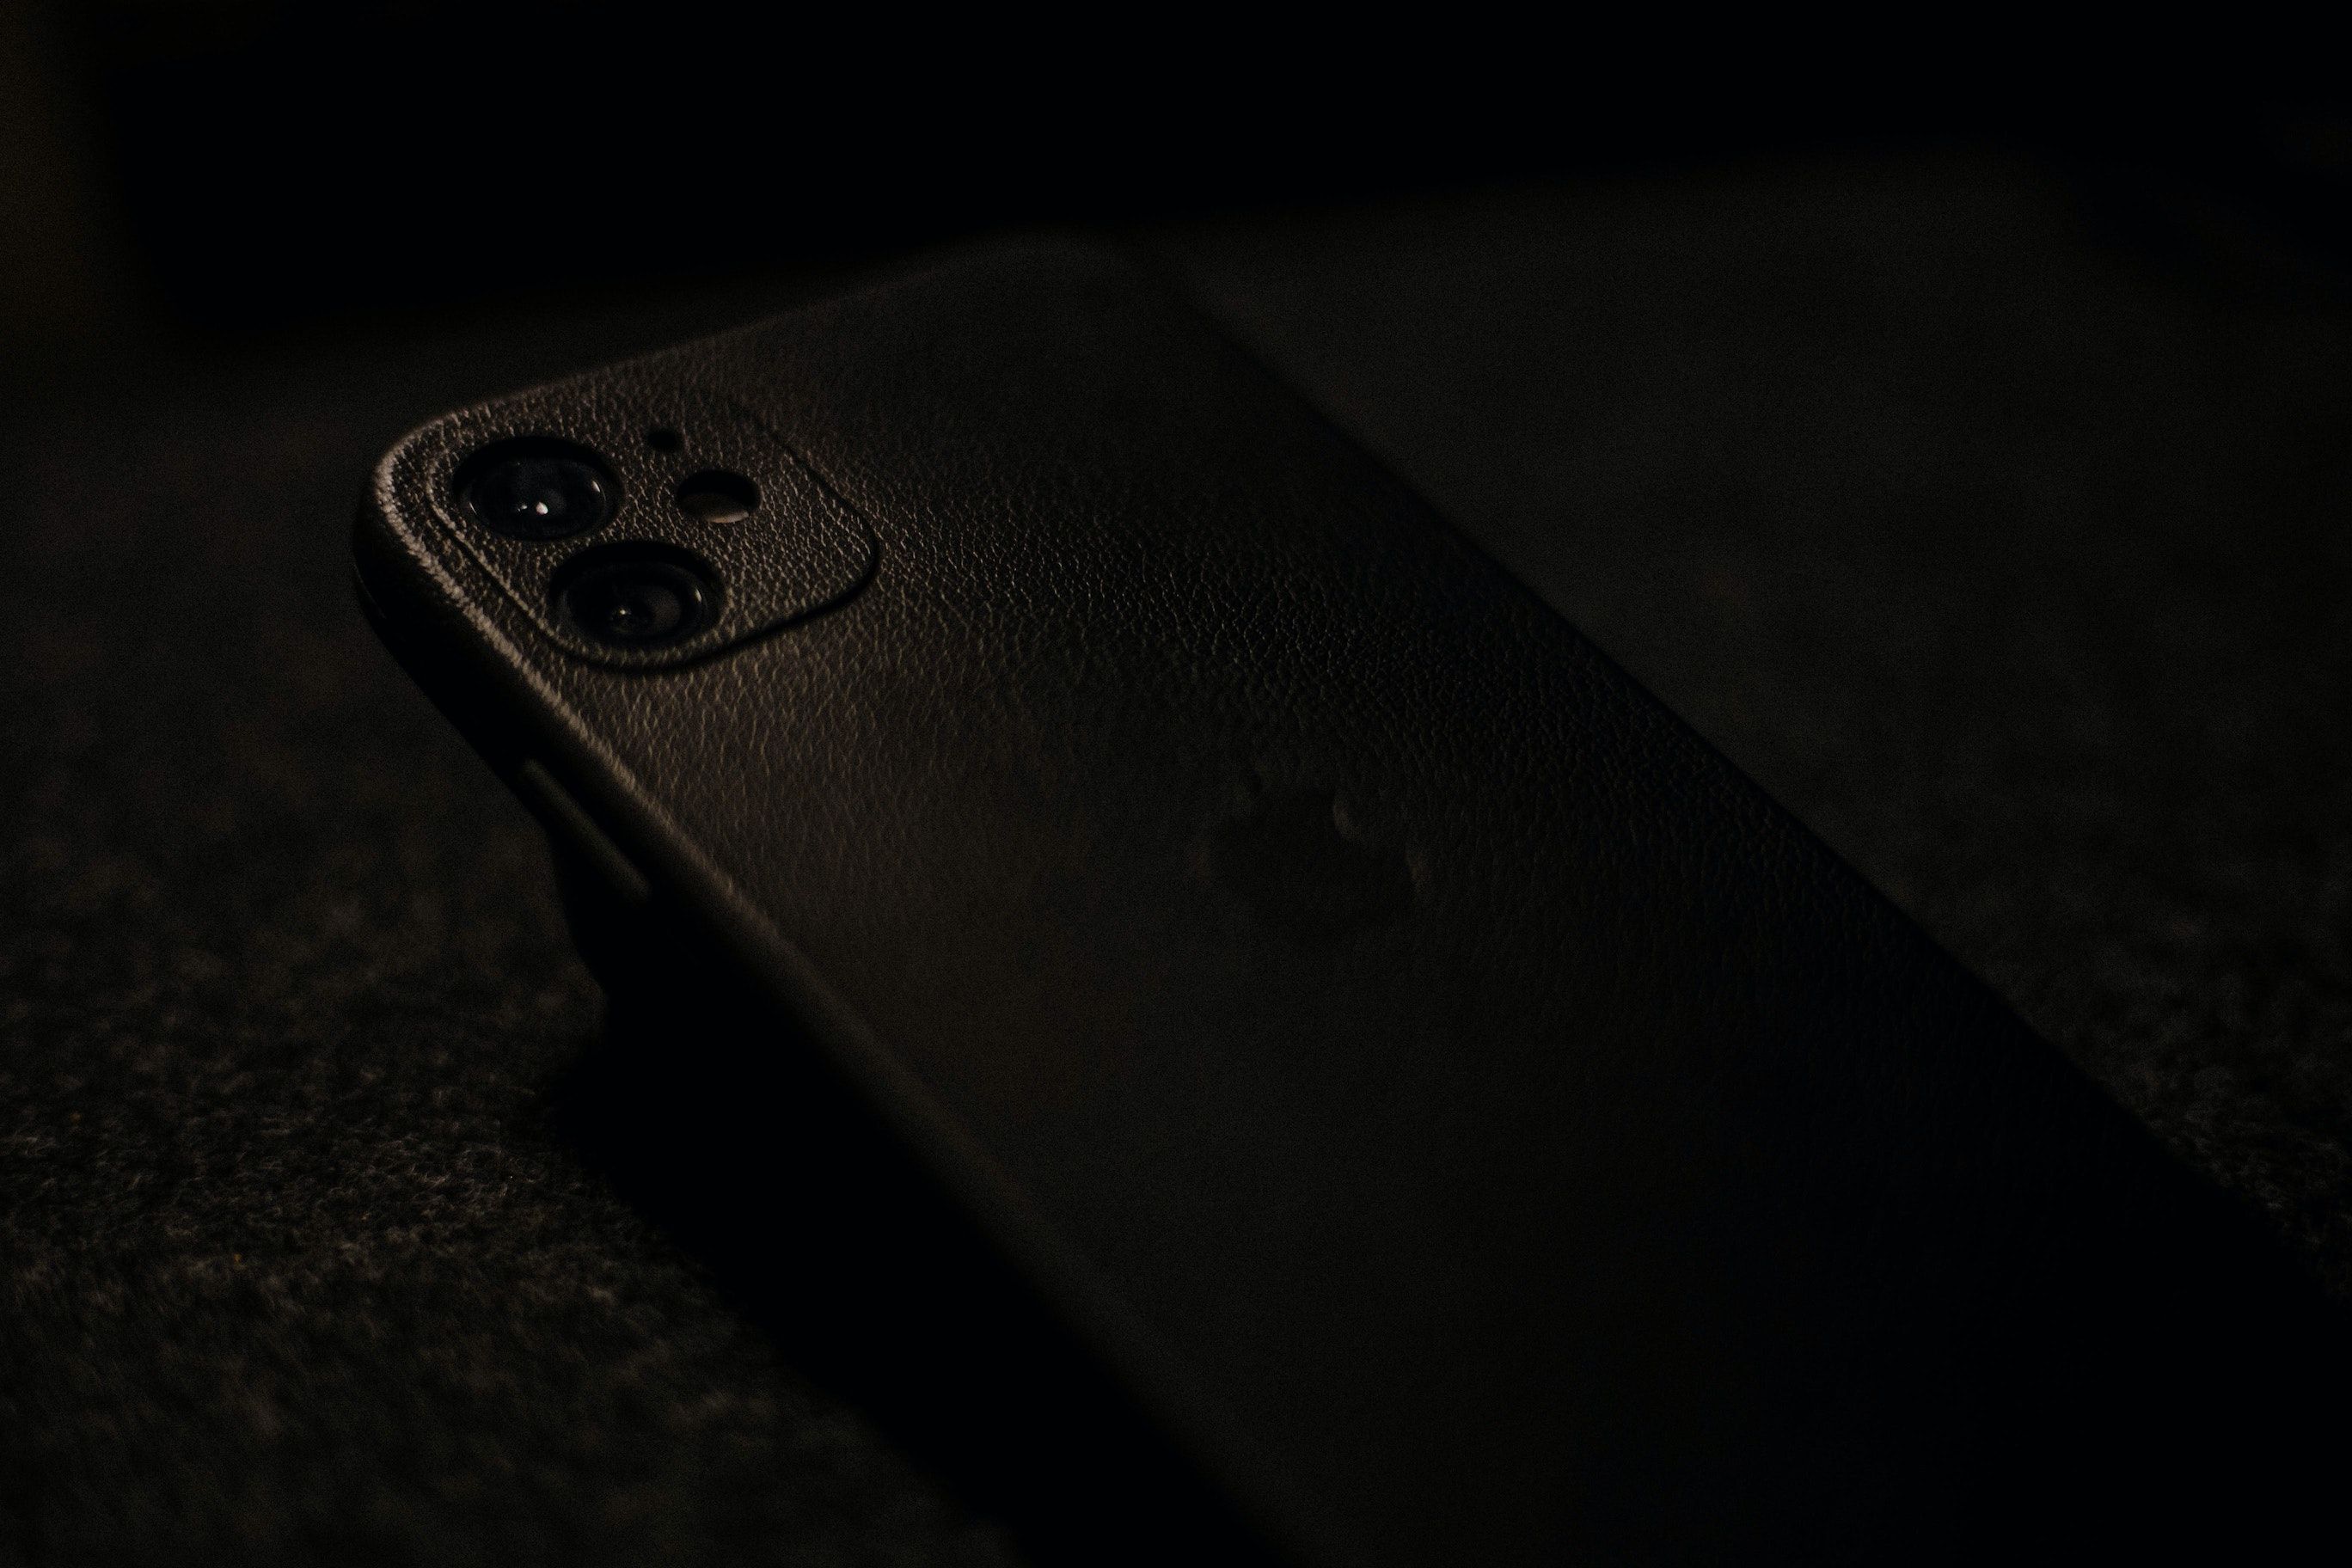 Barely visible black iPhone in black leather case, against a black background